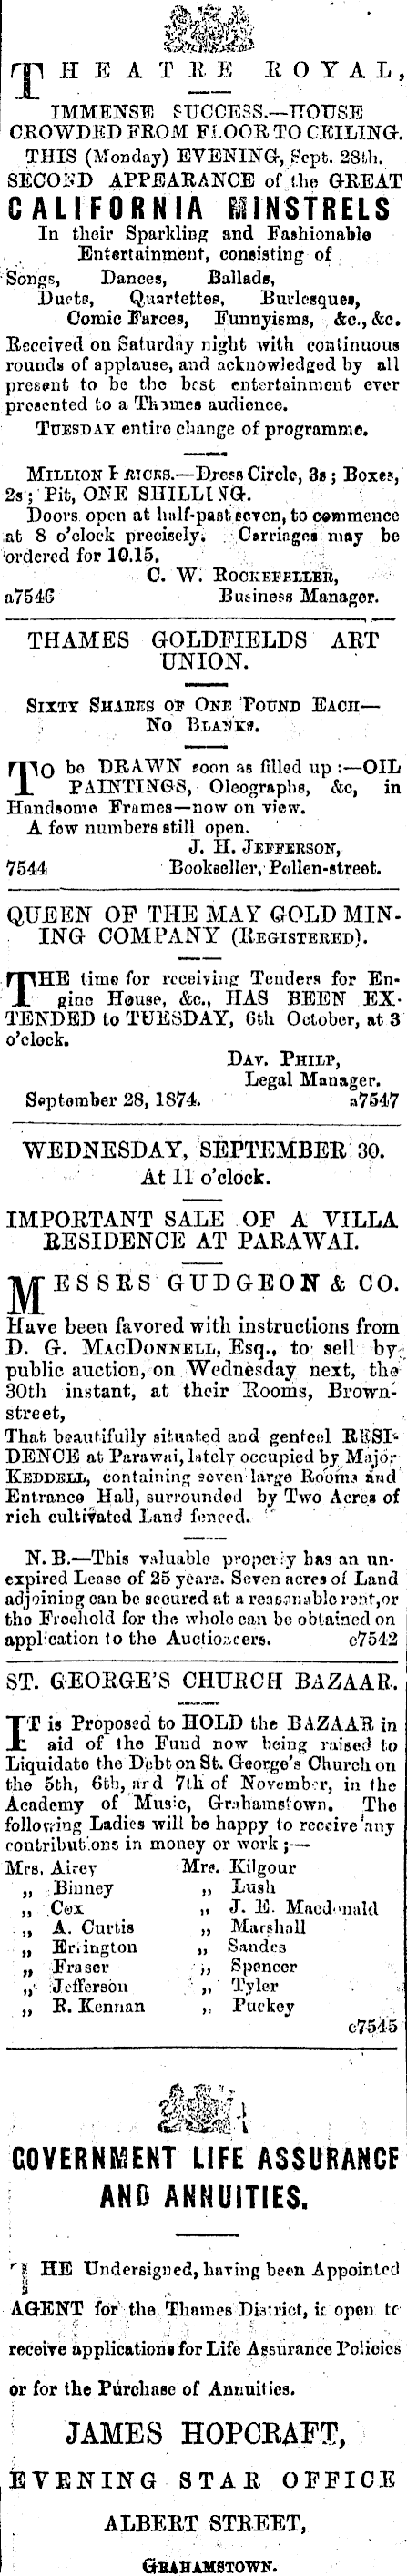 Papers Past Newspapers Thames Star 28 September 1874 Page 3 Advertisements Column 1